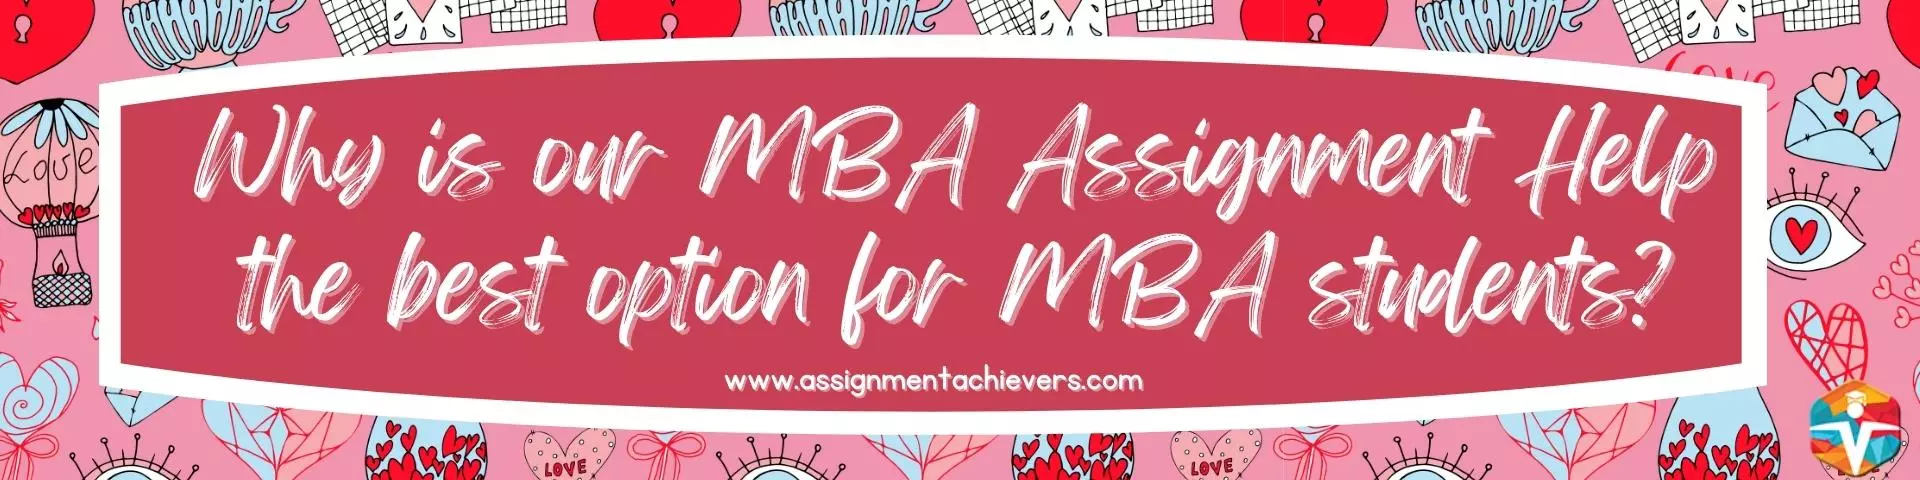 MBA Assignment Help 